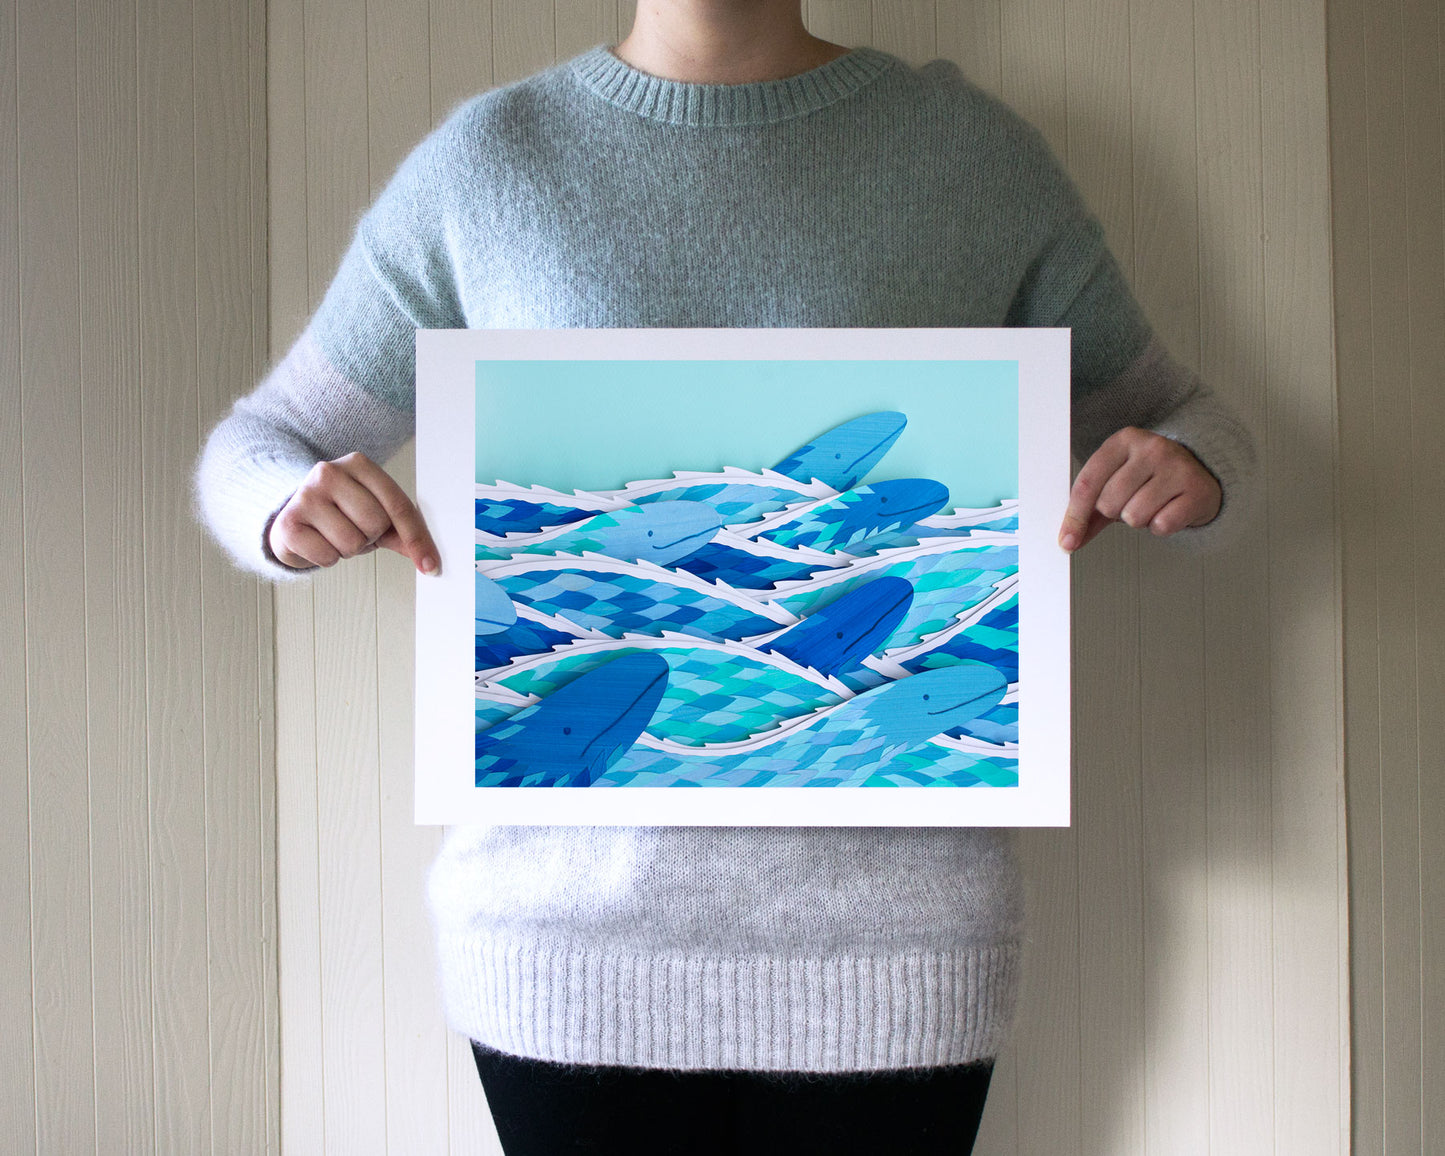 Archival print of cut paper illustration of several cute blue sea serpents swimming.